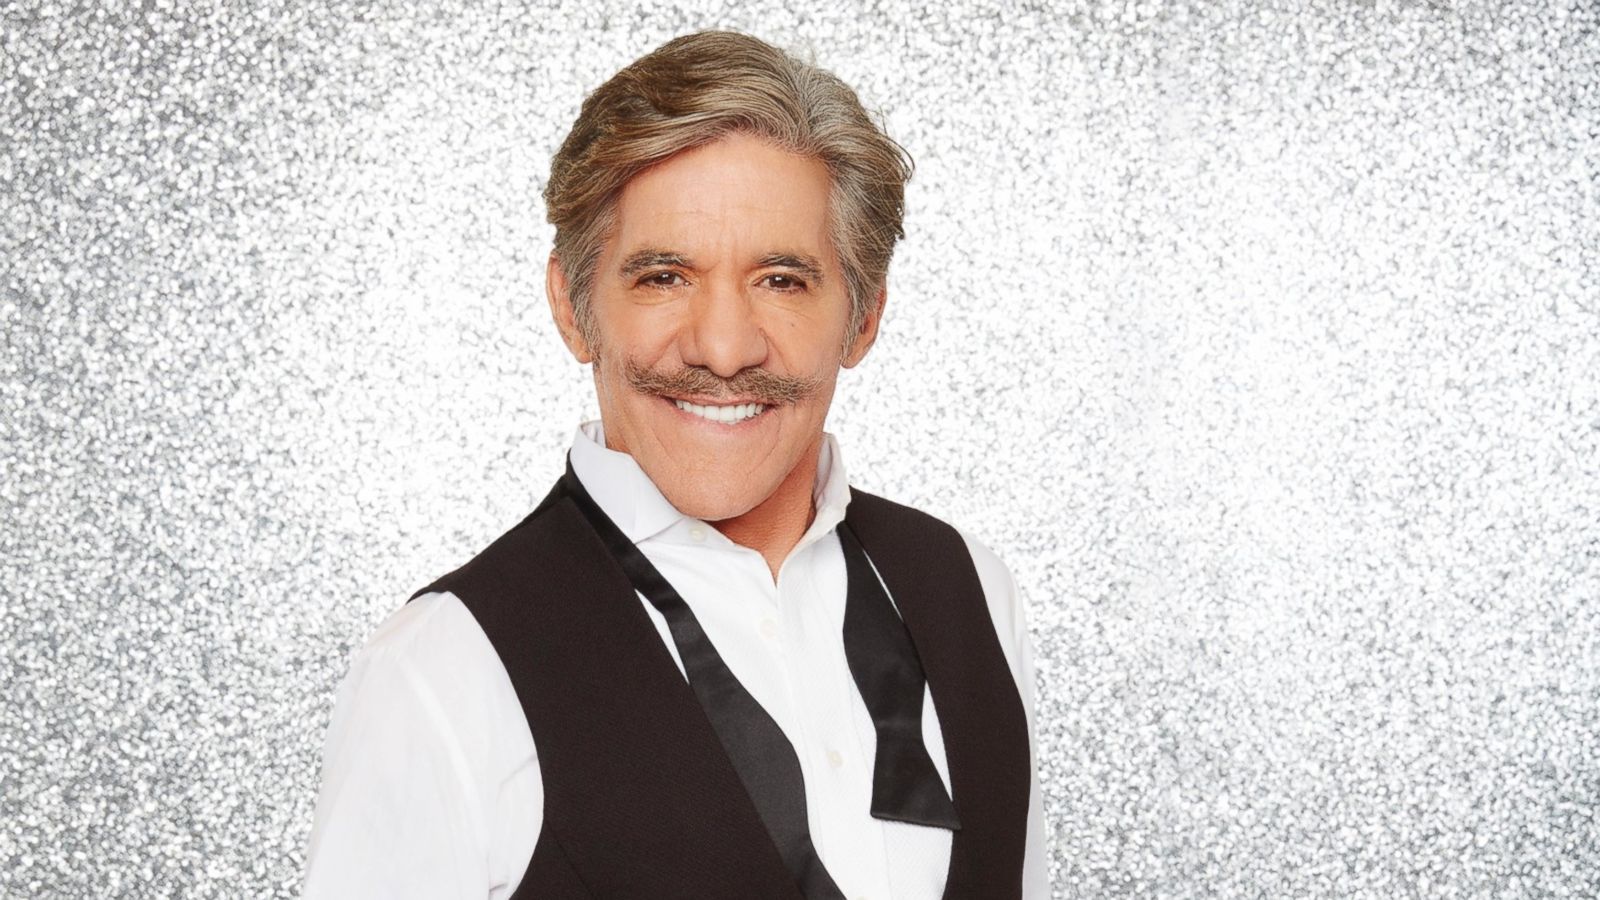 What Disease Does Geraldo Rivera Have